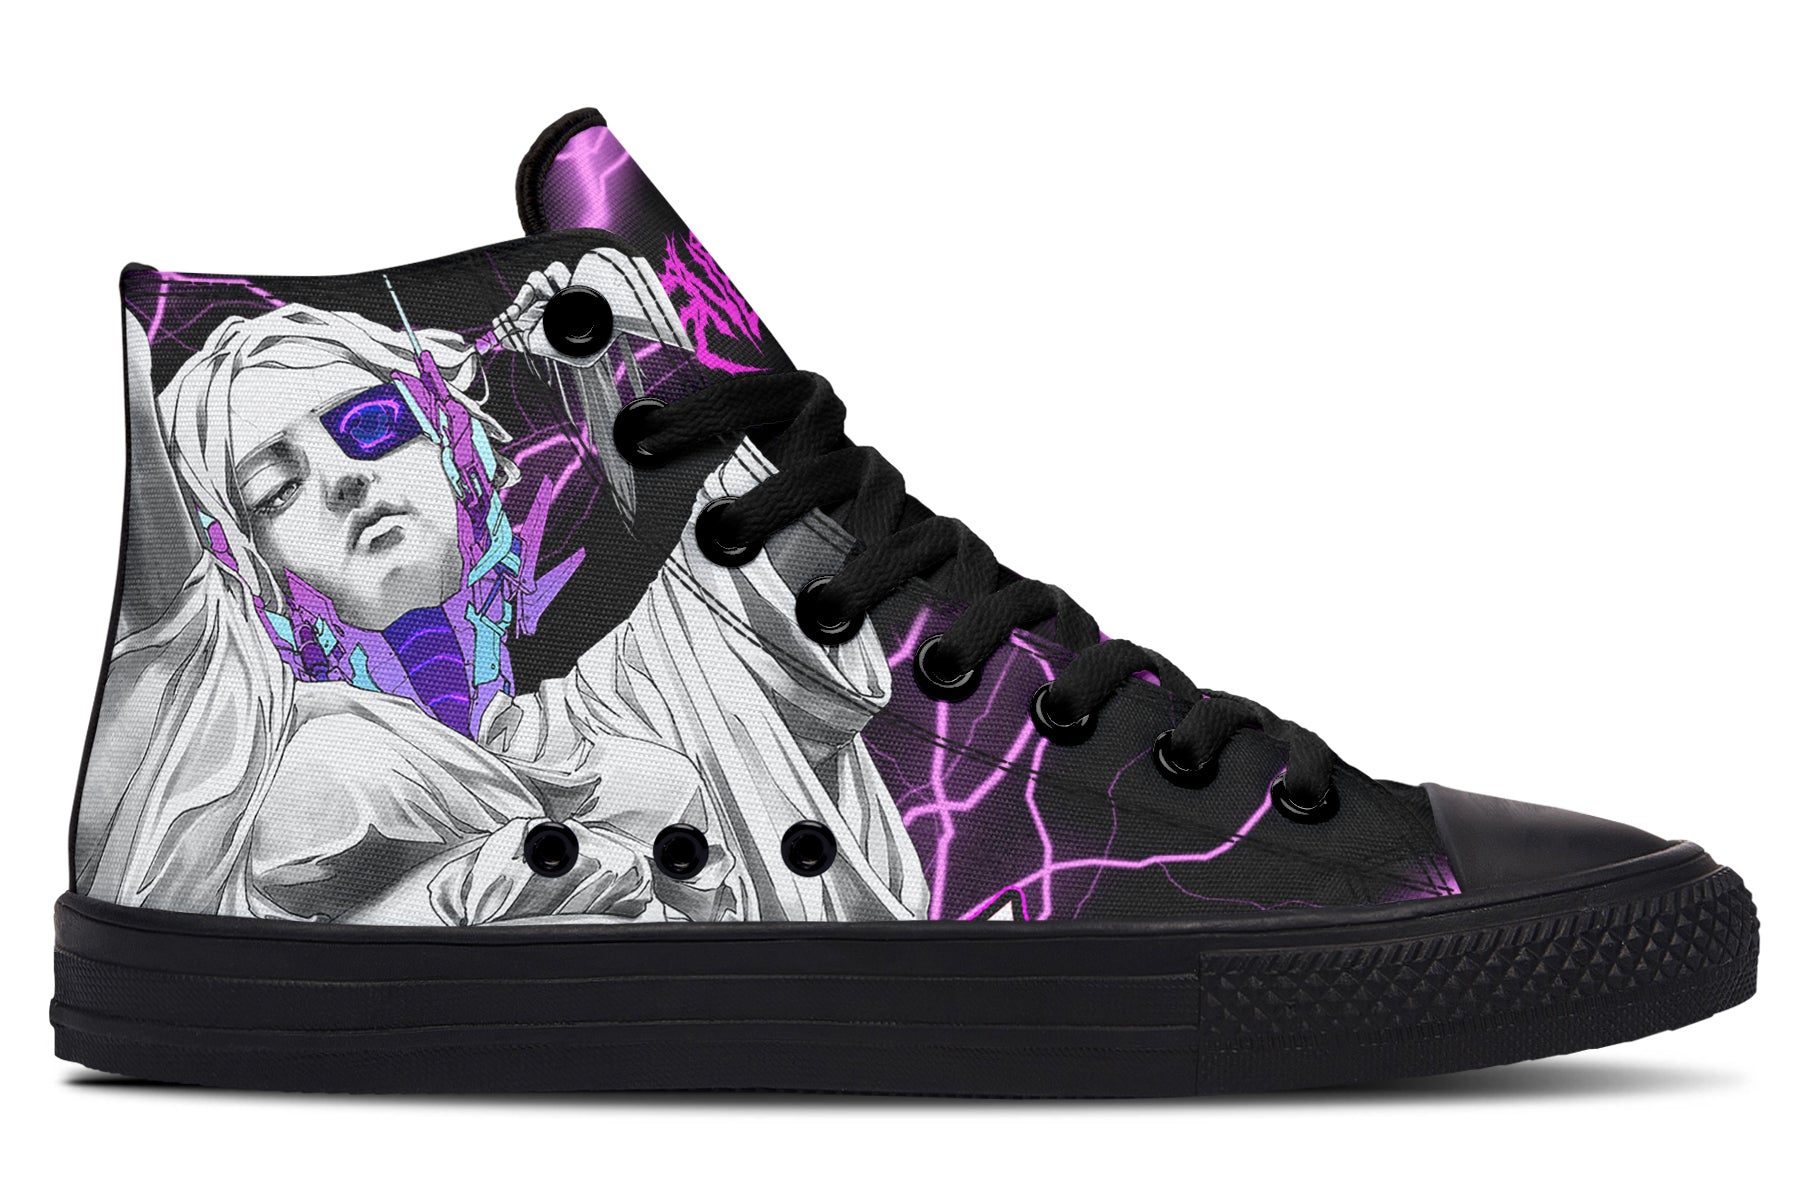 Cybervision High Tops